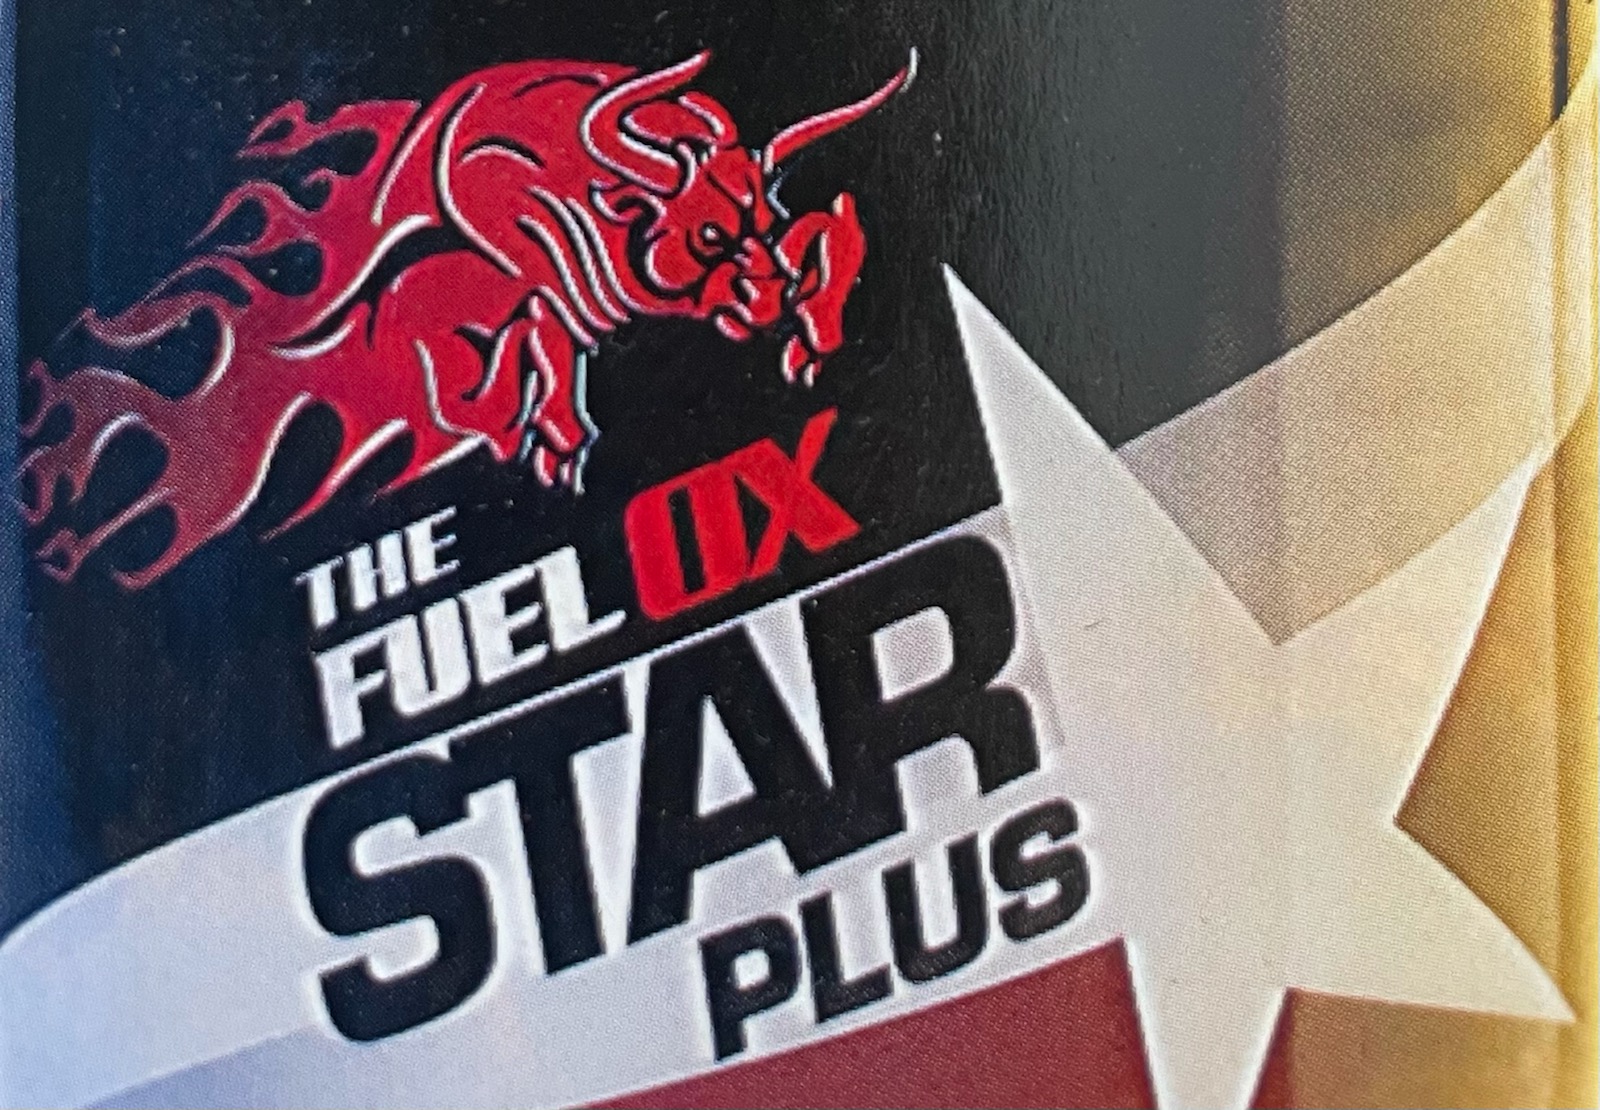 THE FUEL OX